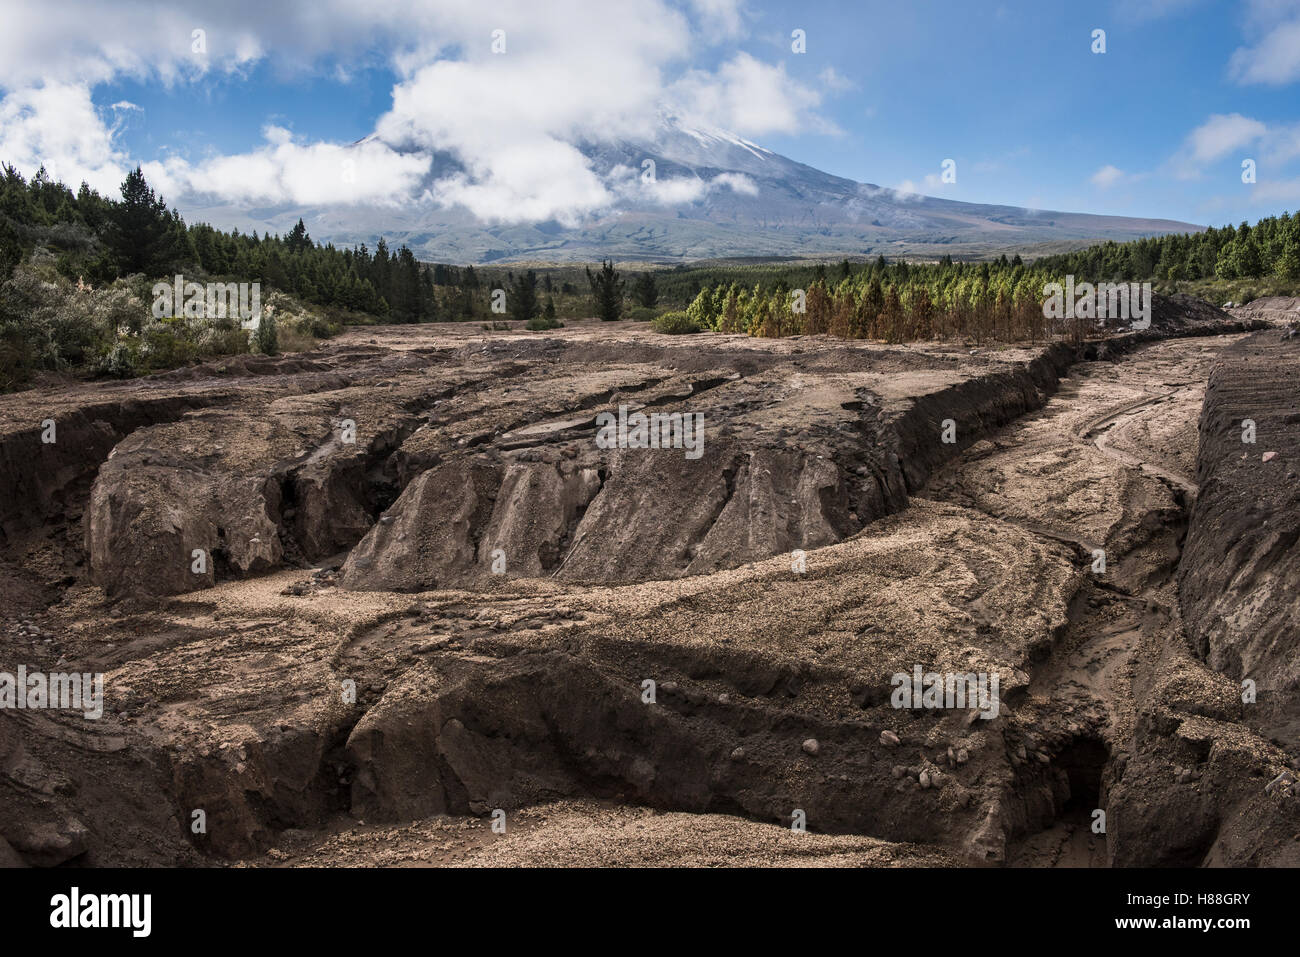 Dried mud flow caused by volcanic eruption, Cotopaxi Volcano, Cotopaxi ...